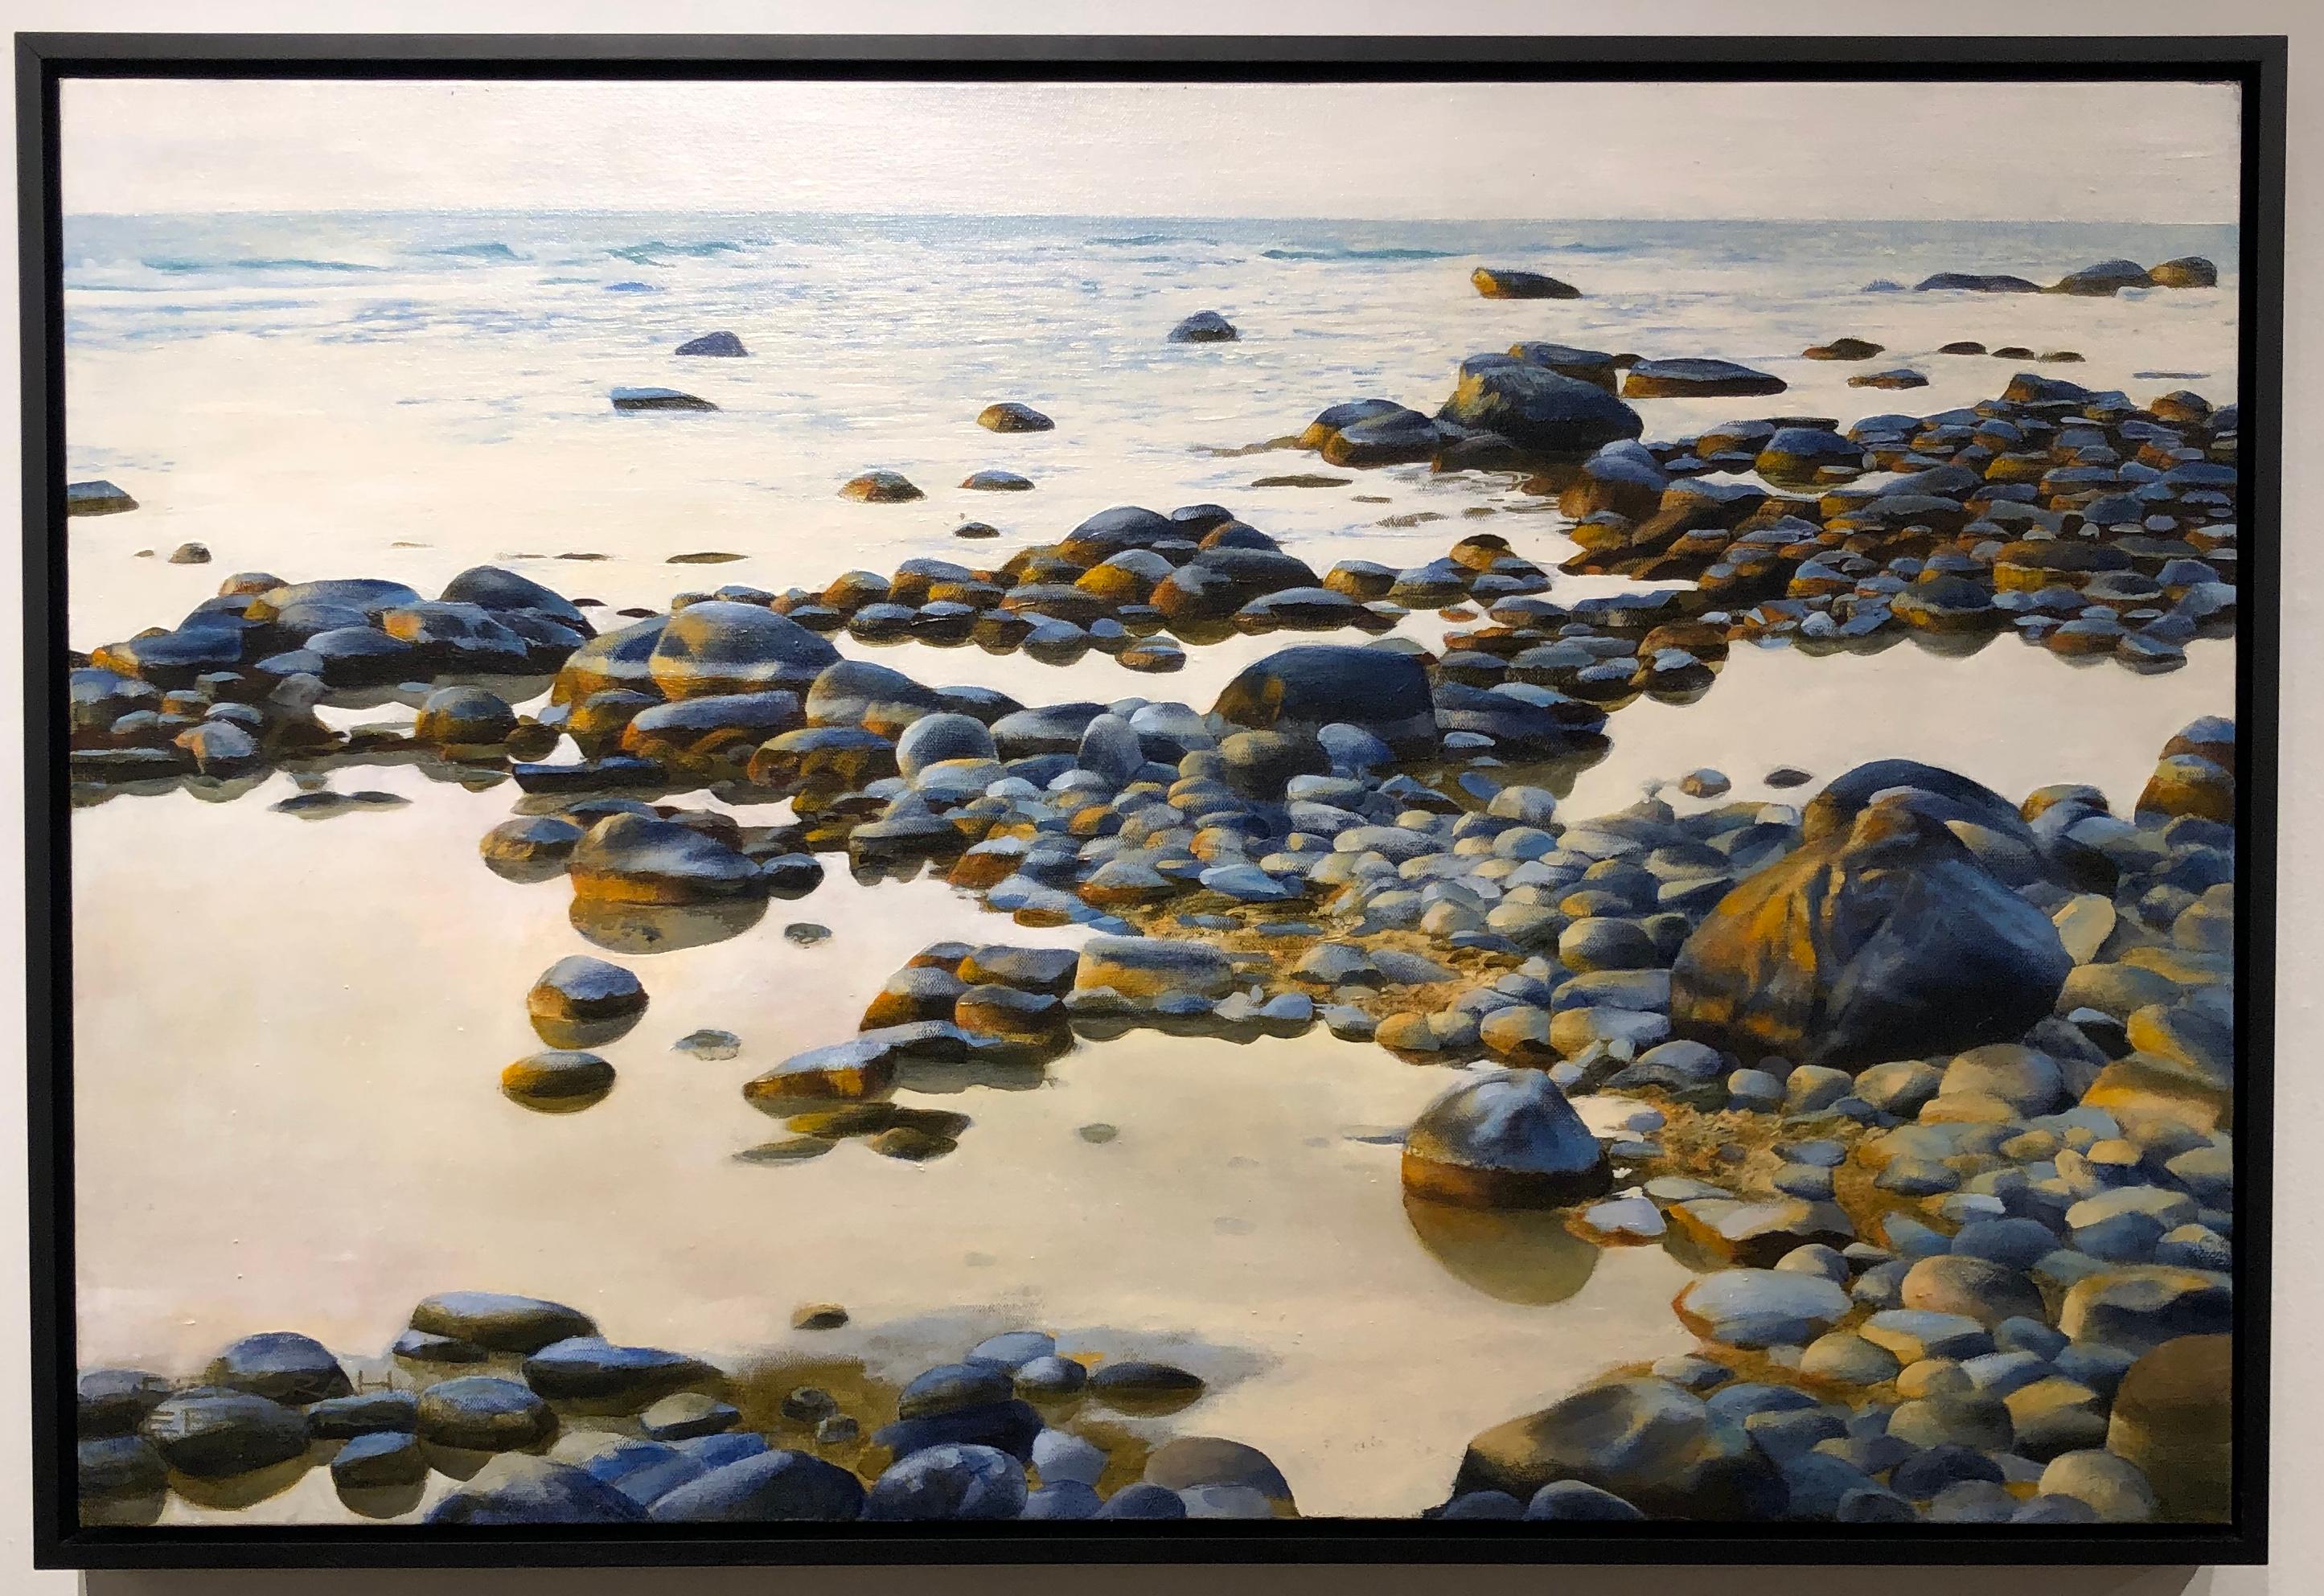 Song of Stones, Rocky Beach of Northern Michigan, Original Oil on Canvas - Painting by Deborah Ebbers